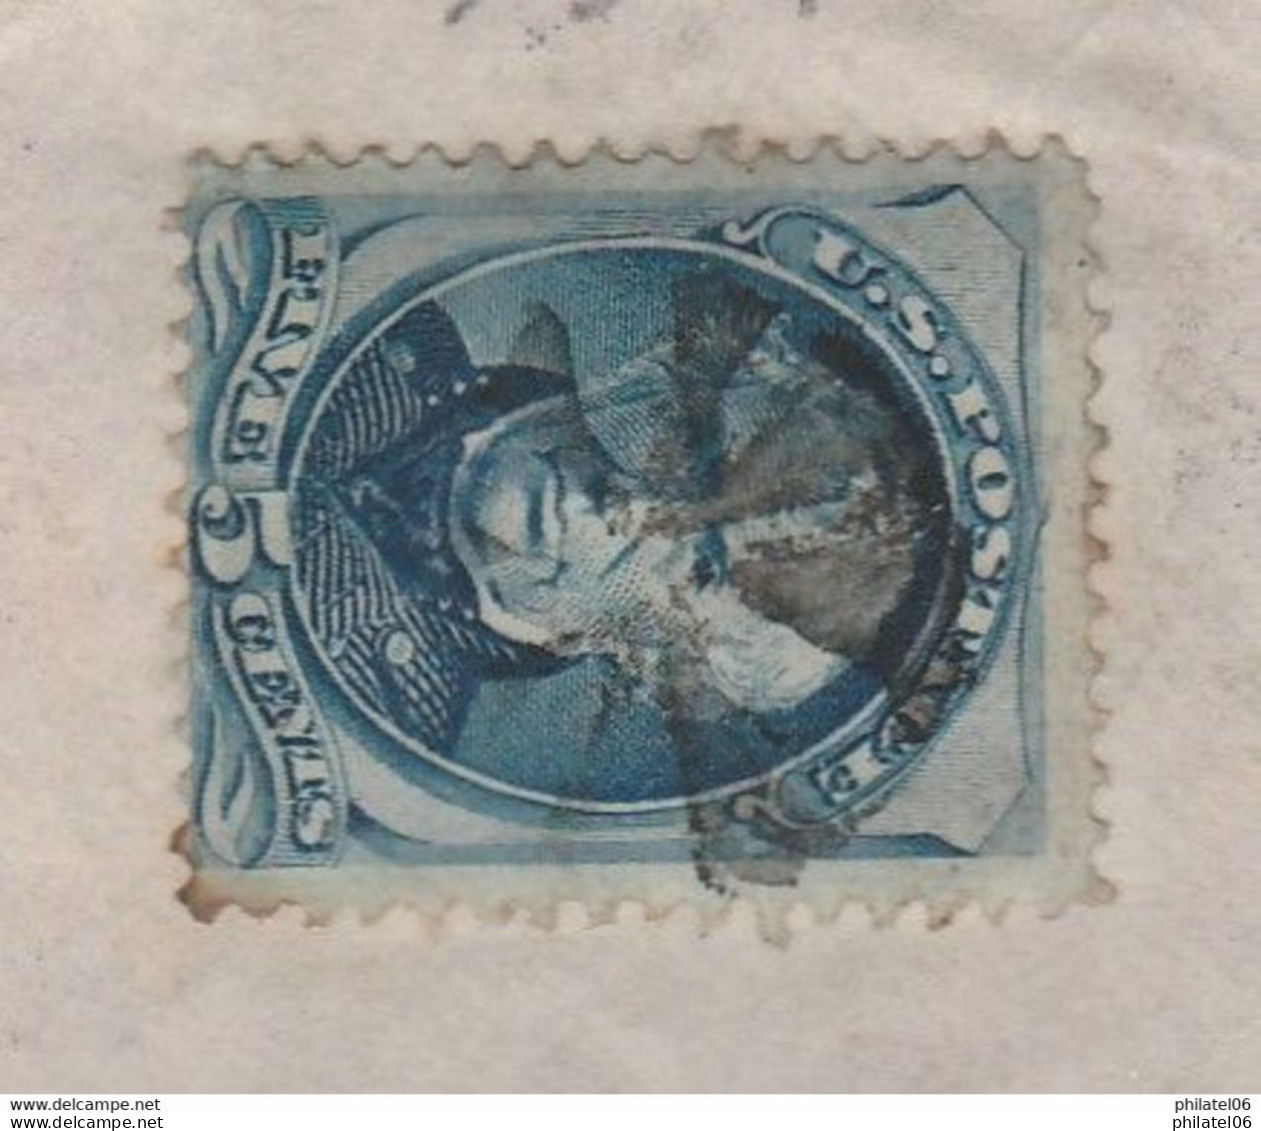 BEAUTIFUL AND VERY  RARE LETTER UNITED STATES POSTAL AGENCY IN SHANGHAI,CHINA. 1876 - Offices In China